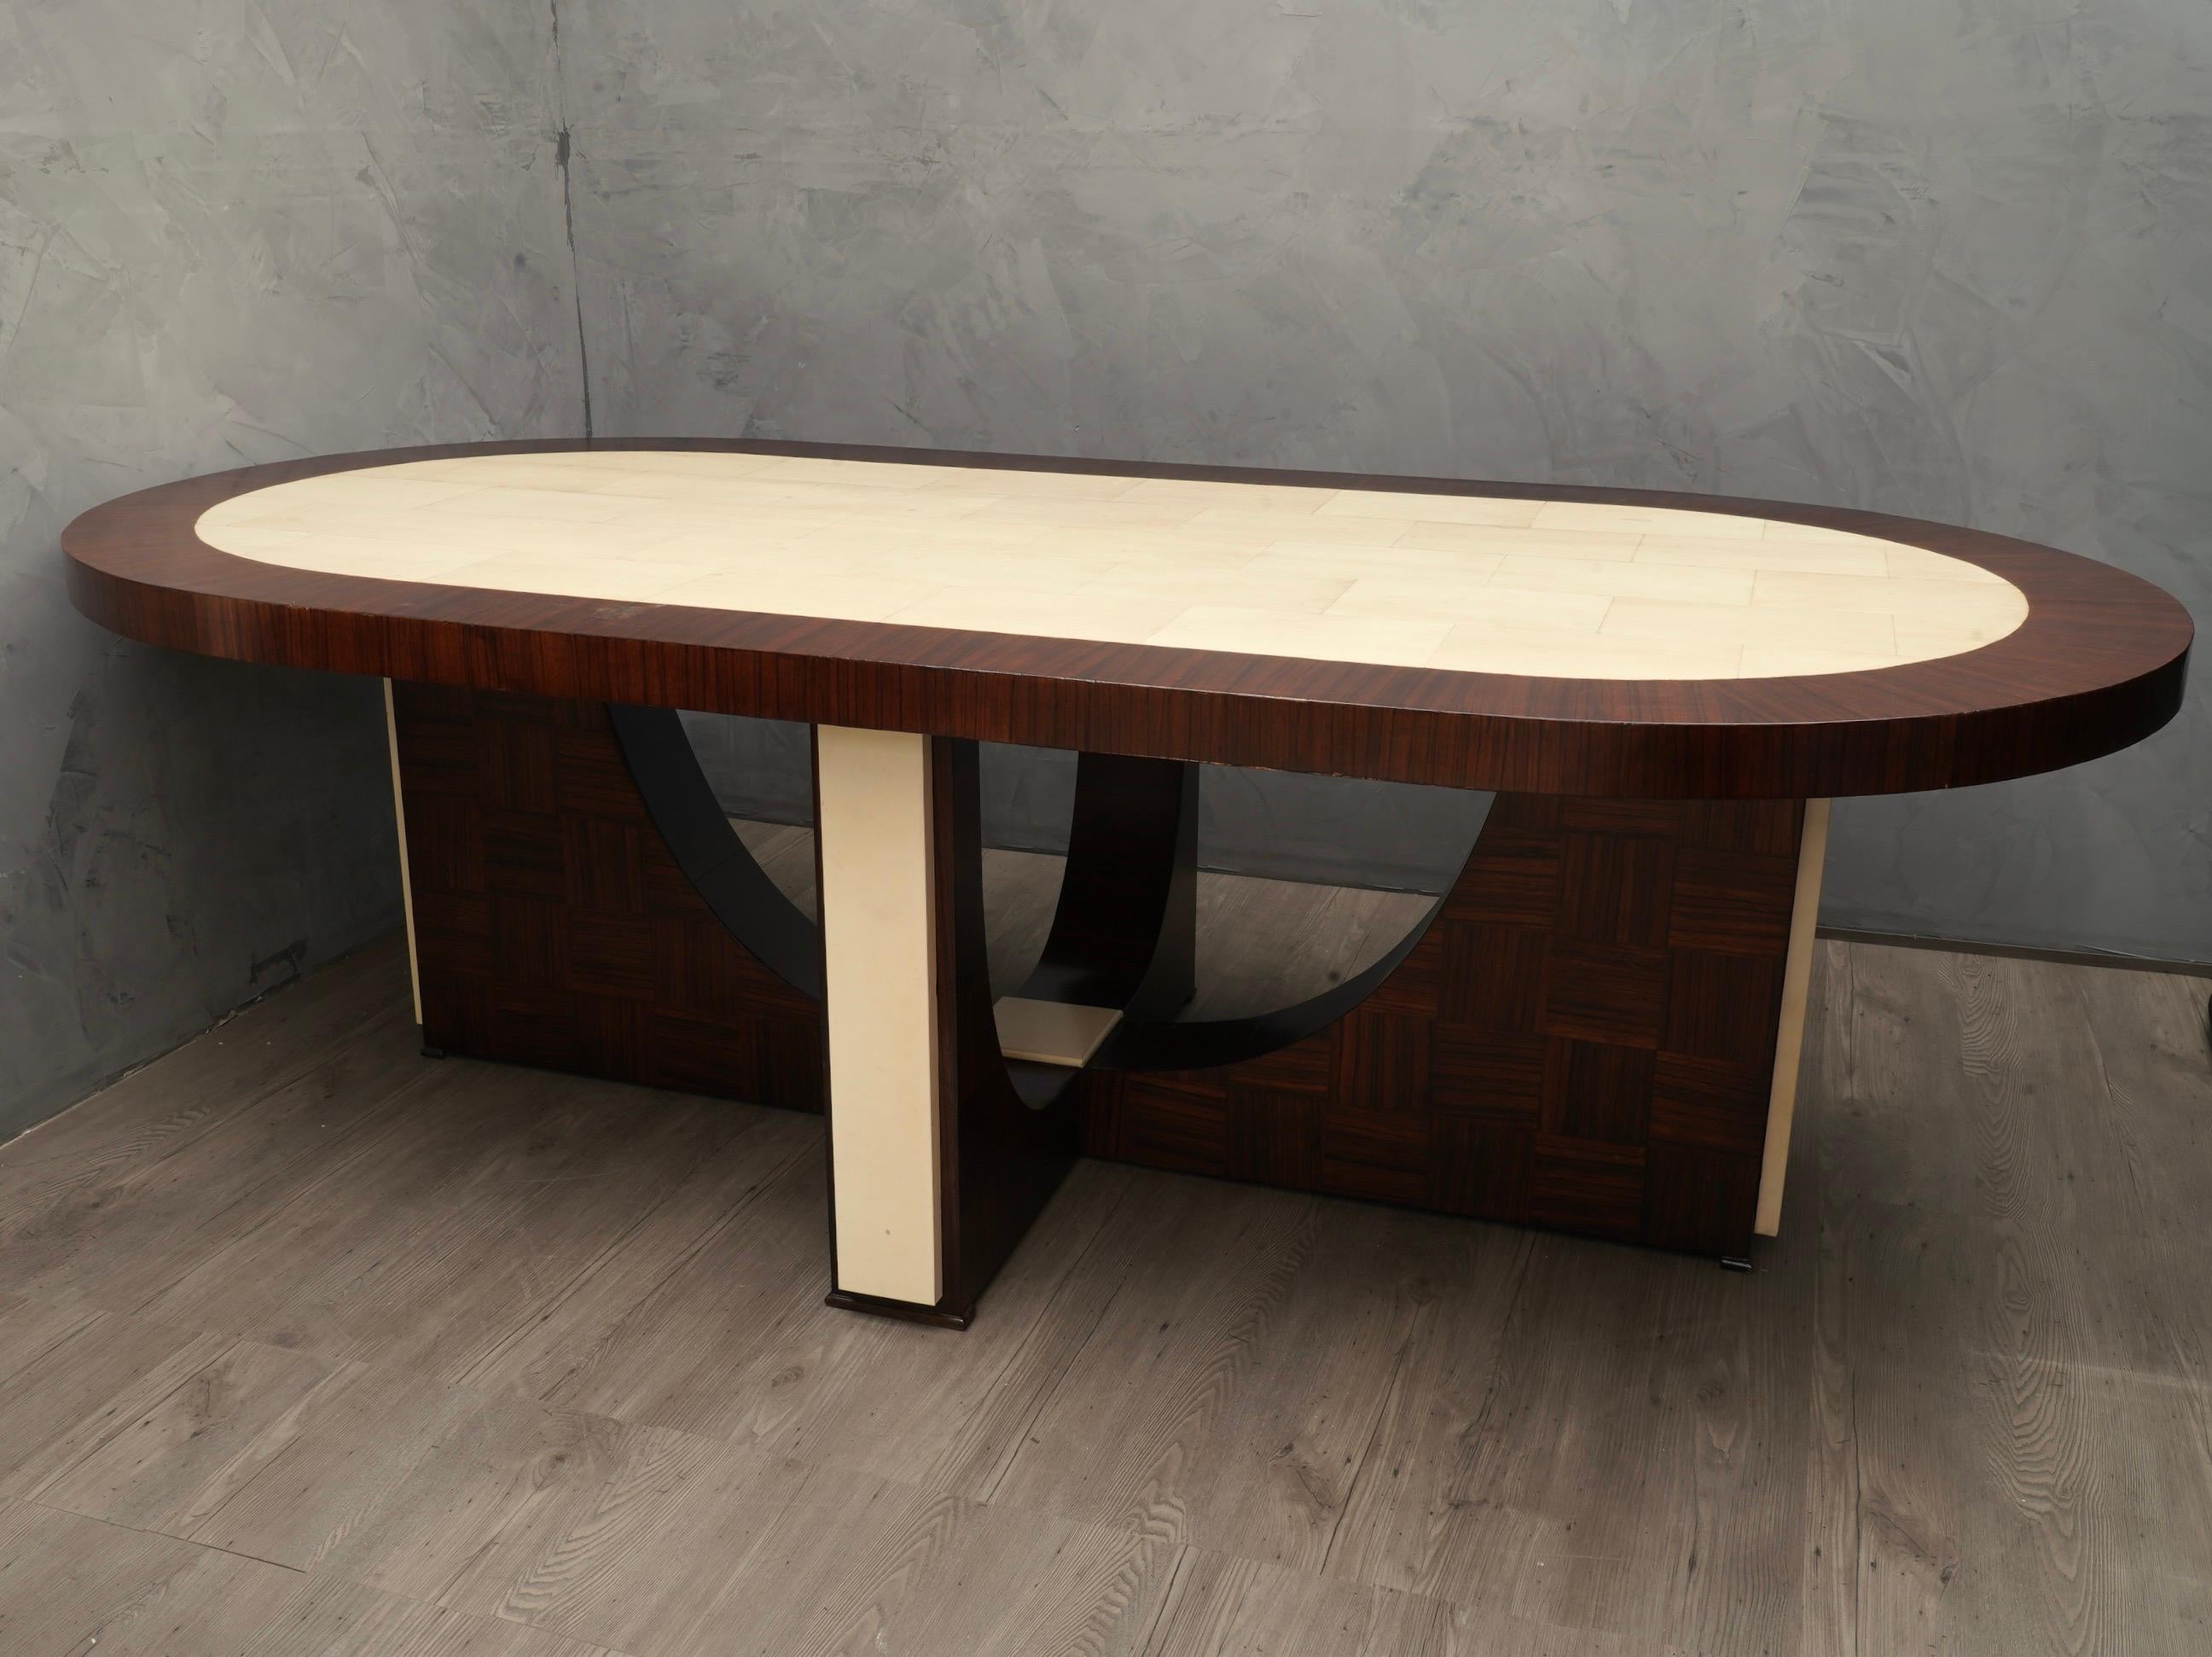 Midcentury Oval Zebrano Wood and Goatskin Italian Table, 1950 For Sale 2